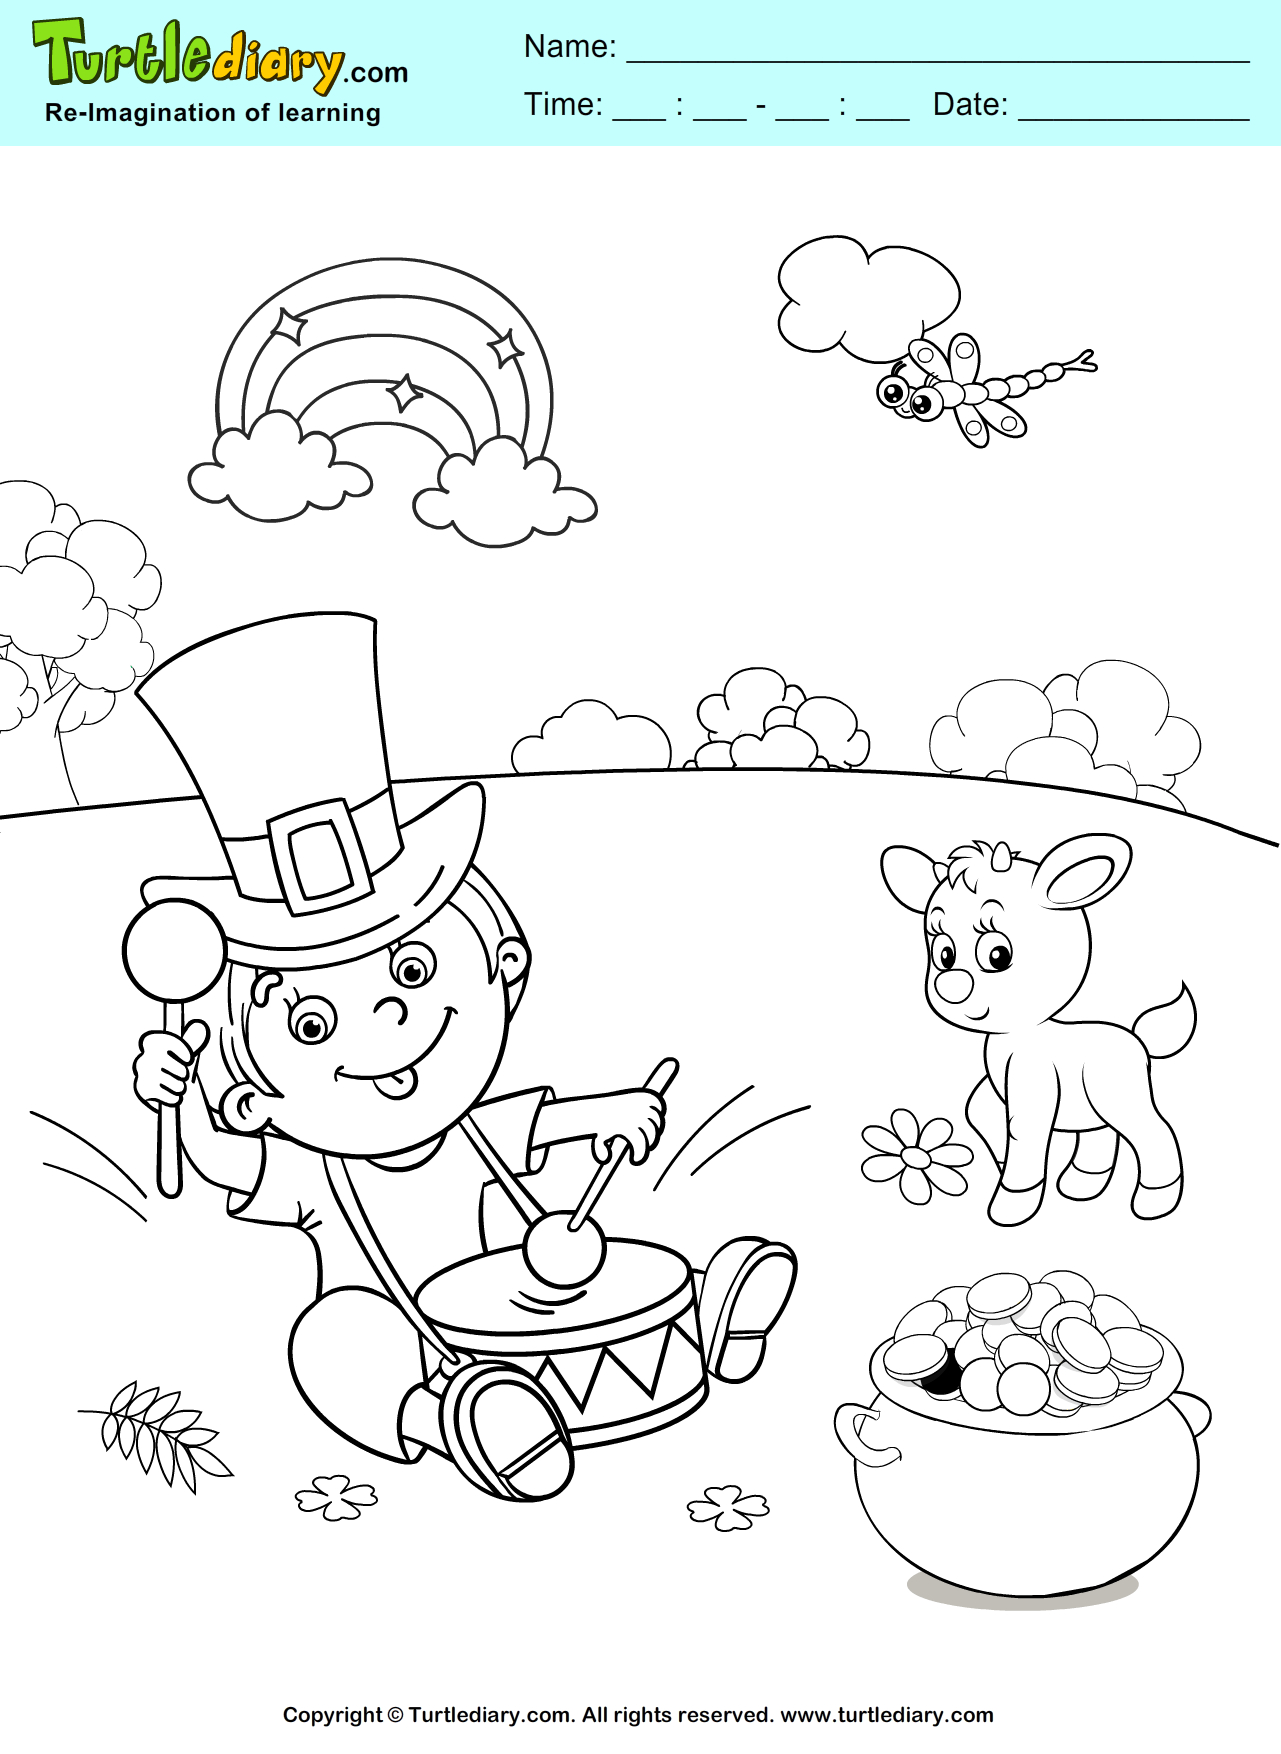 Coloring Pages : Free Printablenbow Coloring Sheet Blank For Blank Face Template Preschool